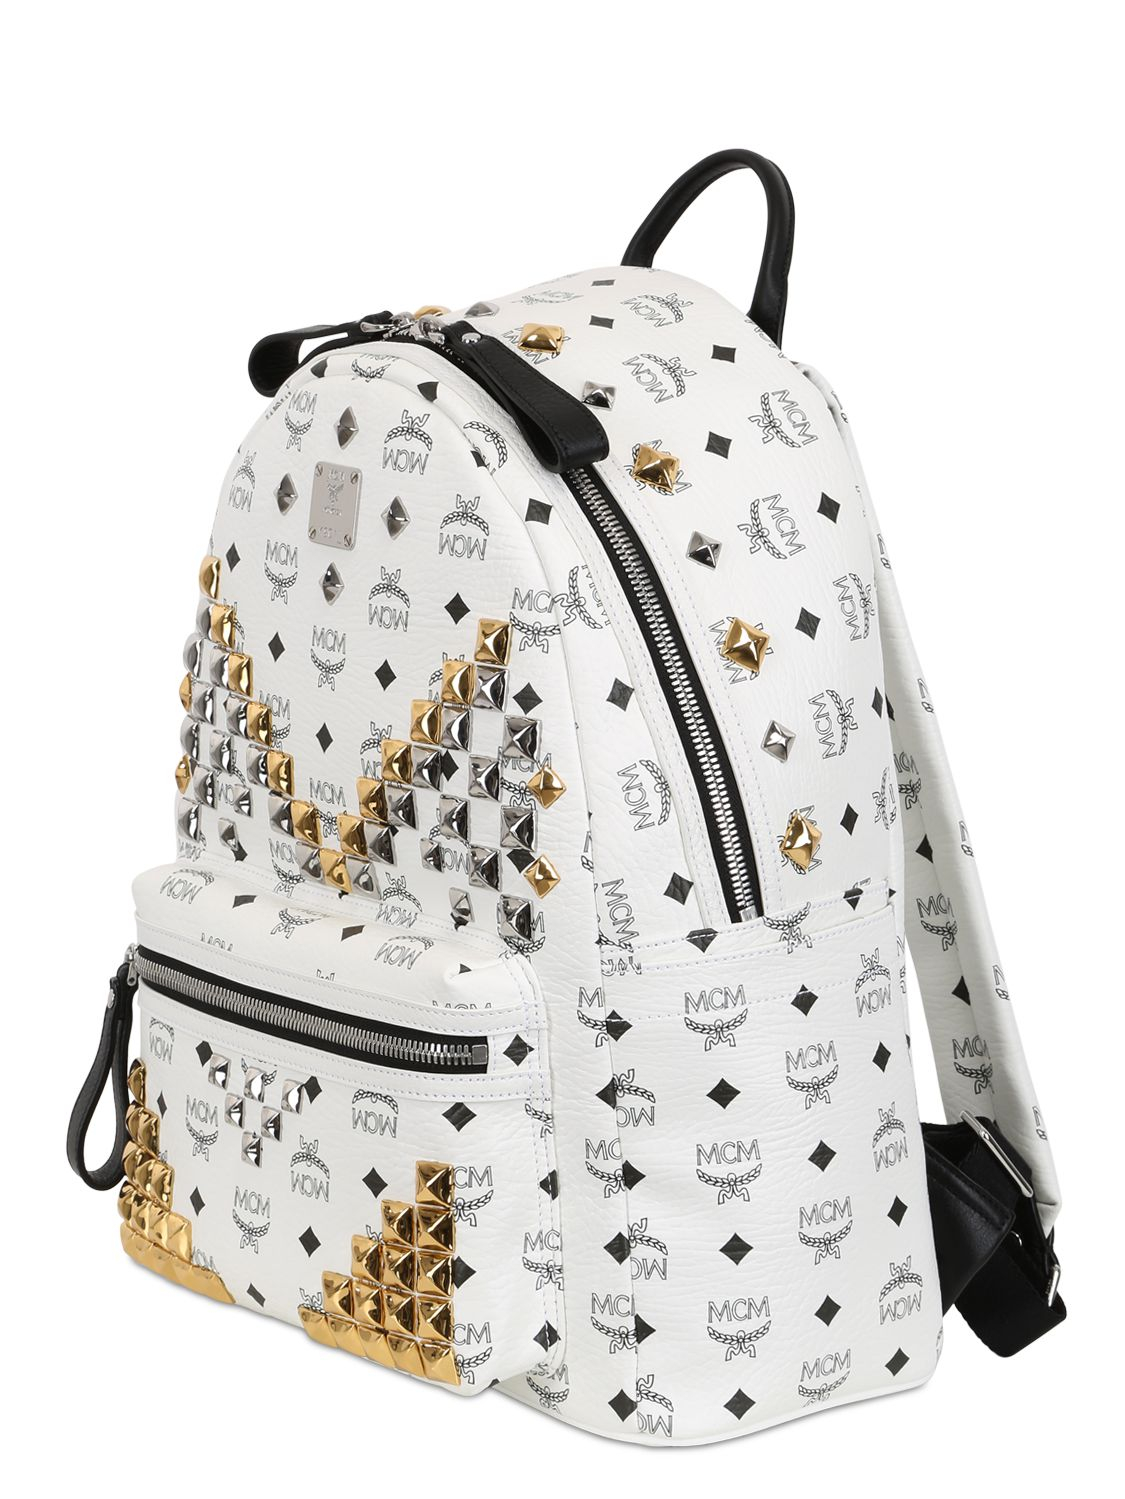 Lyst - Mcm Stark Side Stud Small Backpack in White